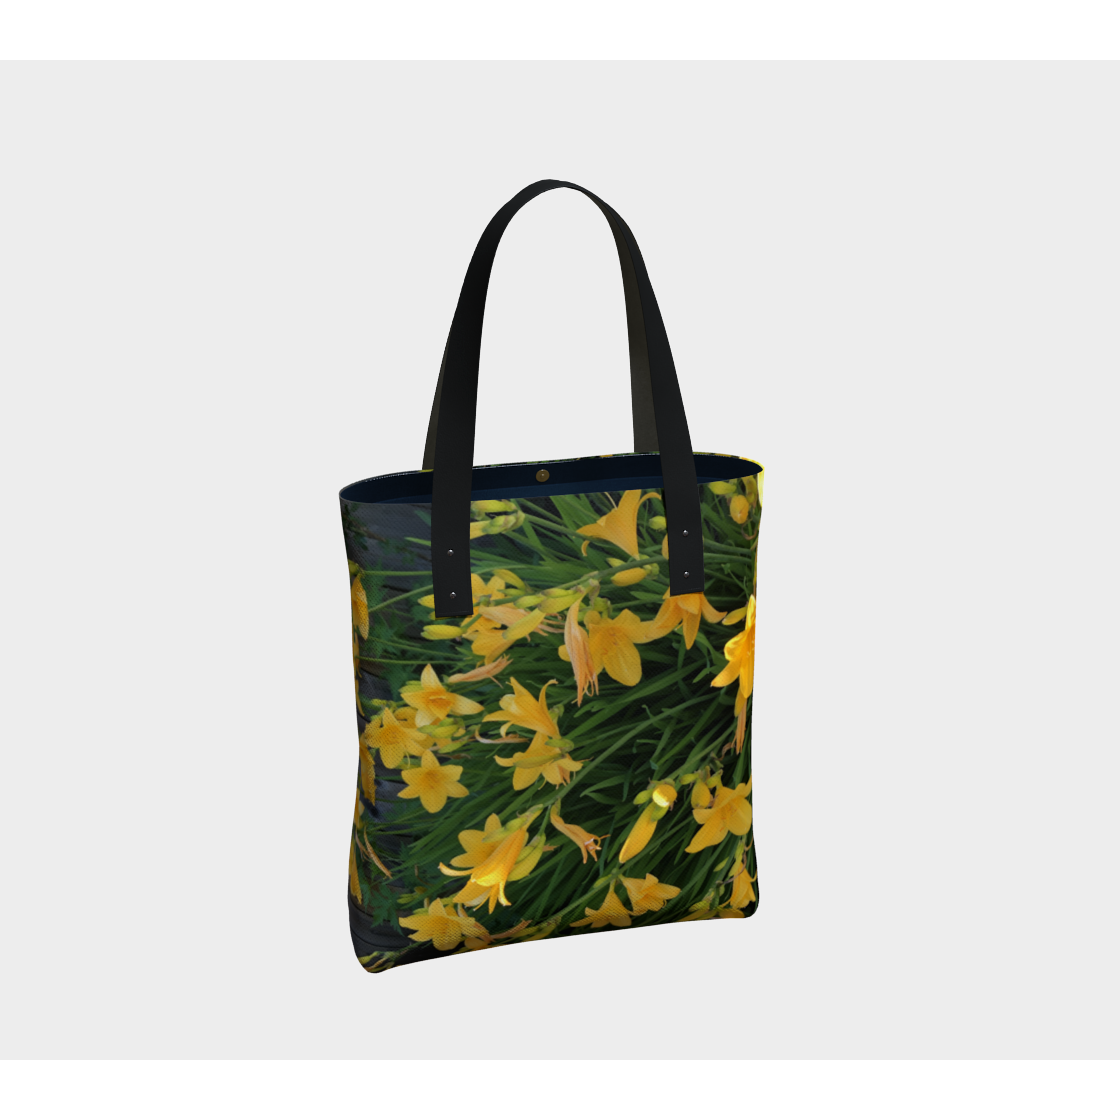 Tote Bag for Women with: Yellow Lily Design, Back